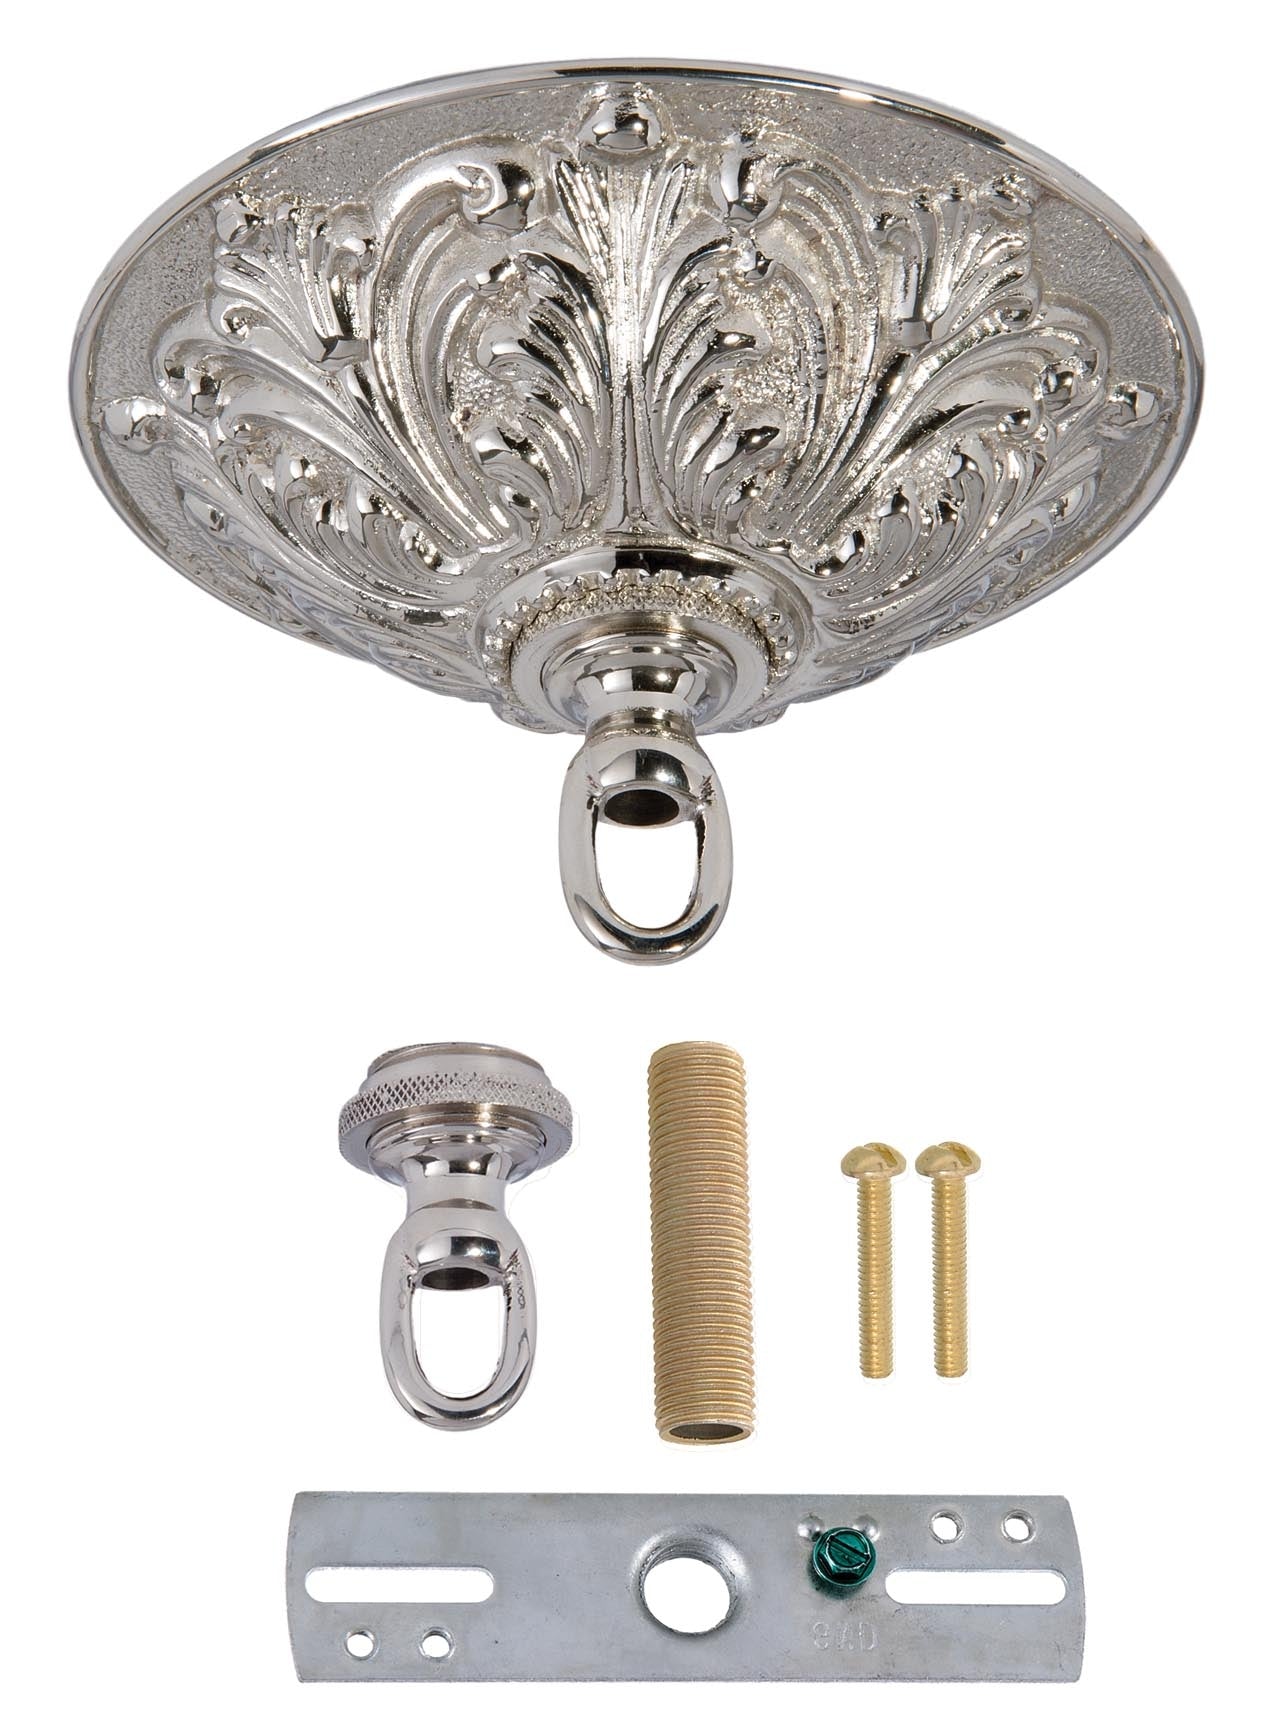 5-1/2" Diameter Ceiling Canopy kit, Die Cast Brass Material, Nickel Plated Finish